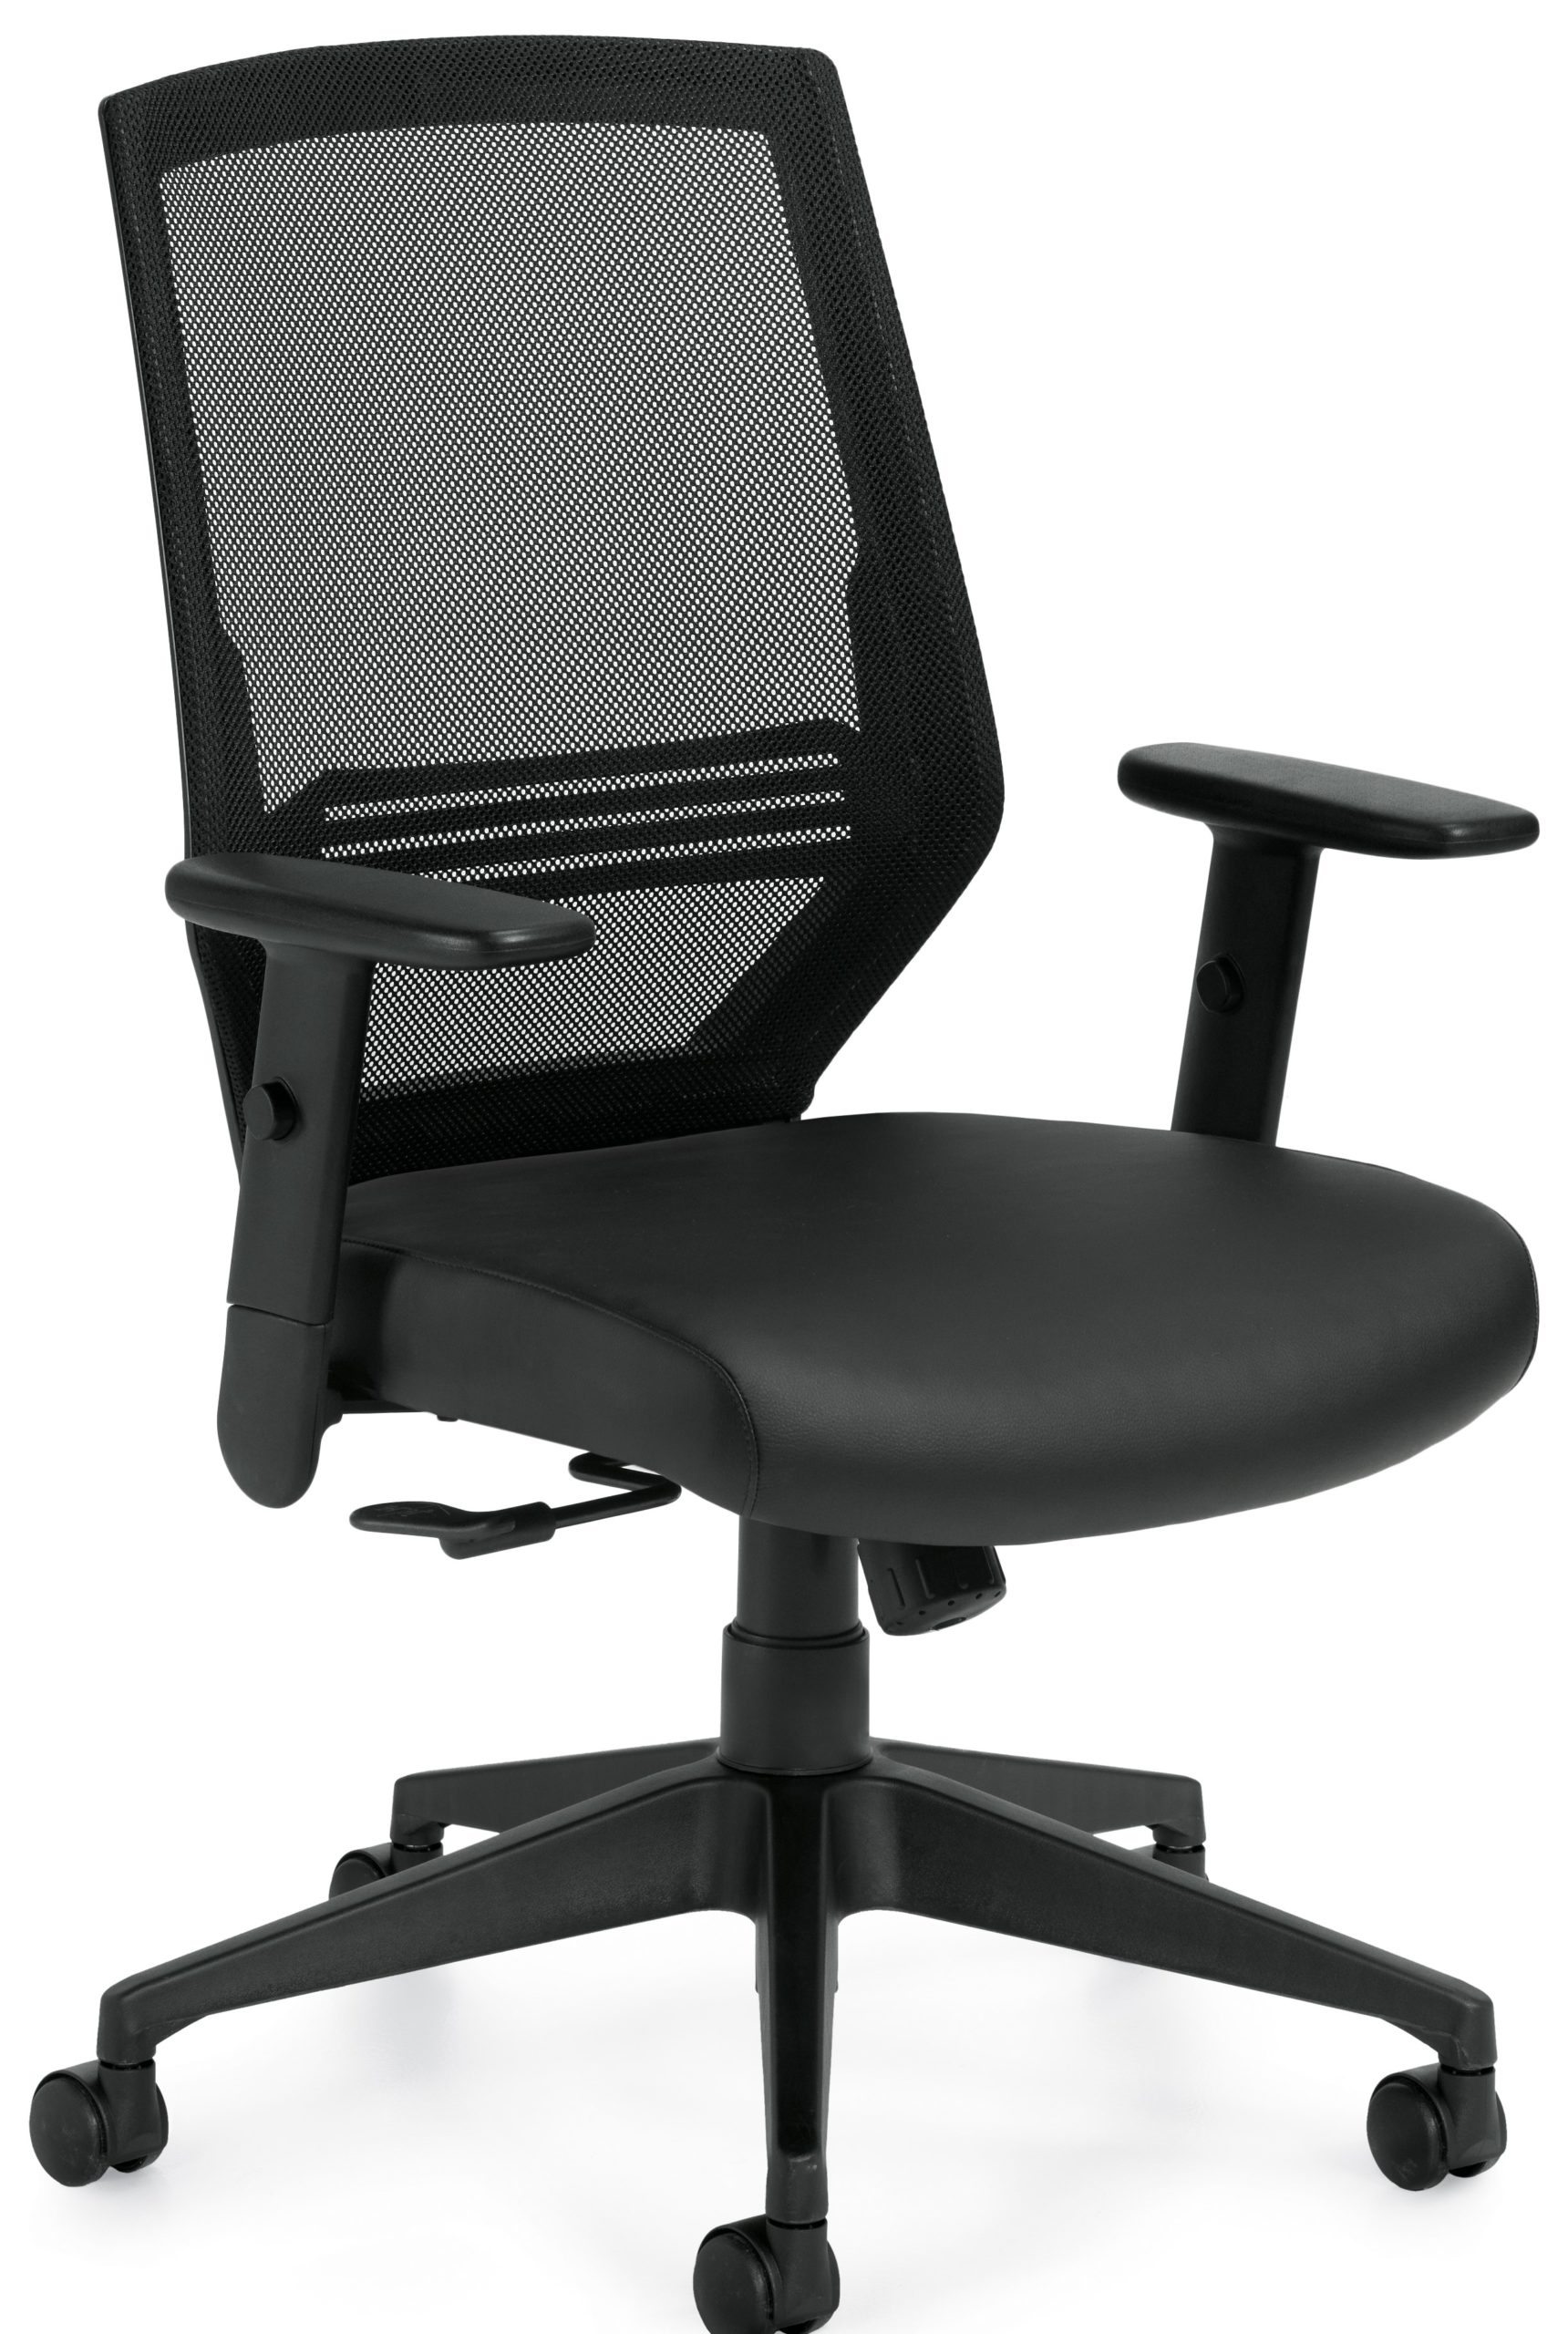 Entry level high back task chair with black mesh back and leathertek seat, adjustable arms, and resin 5-star base.